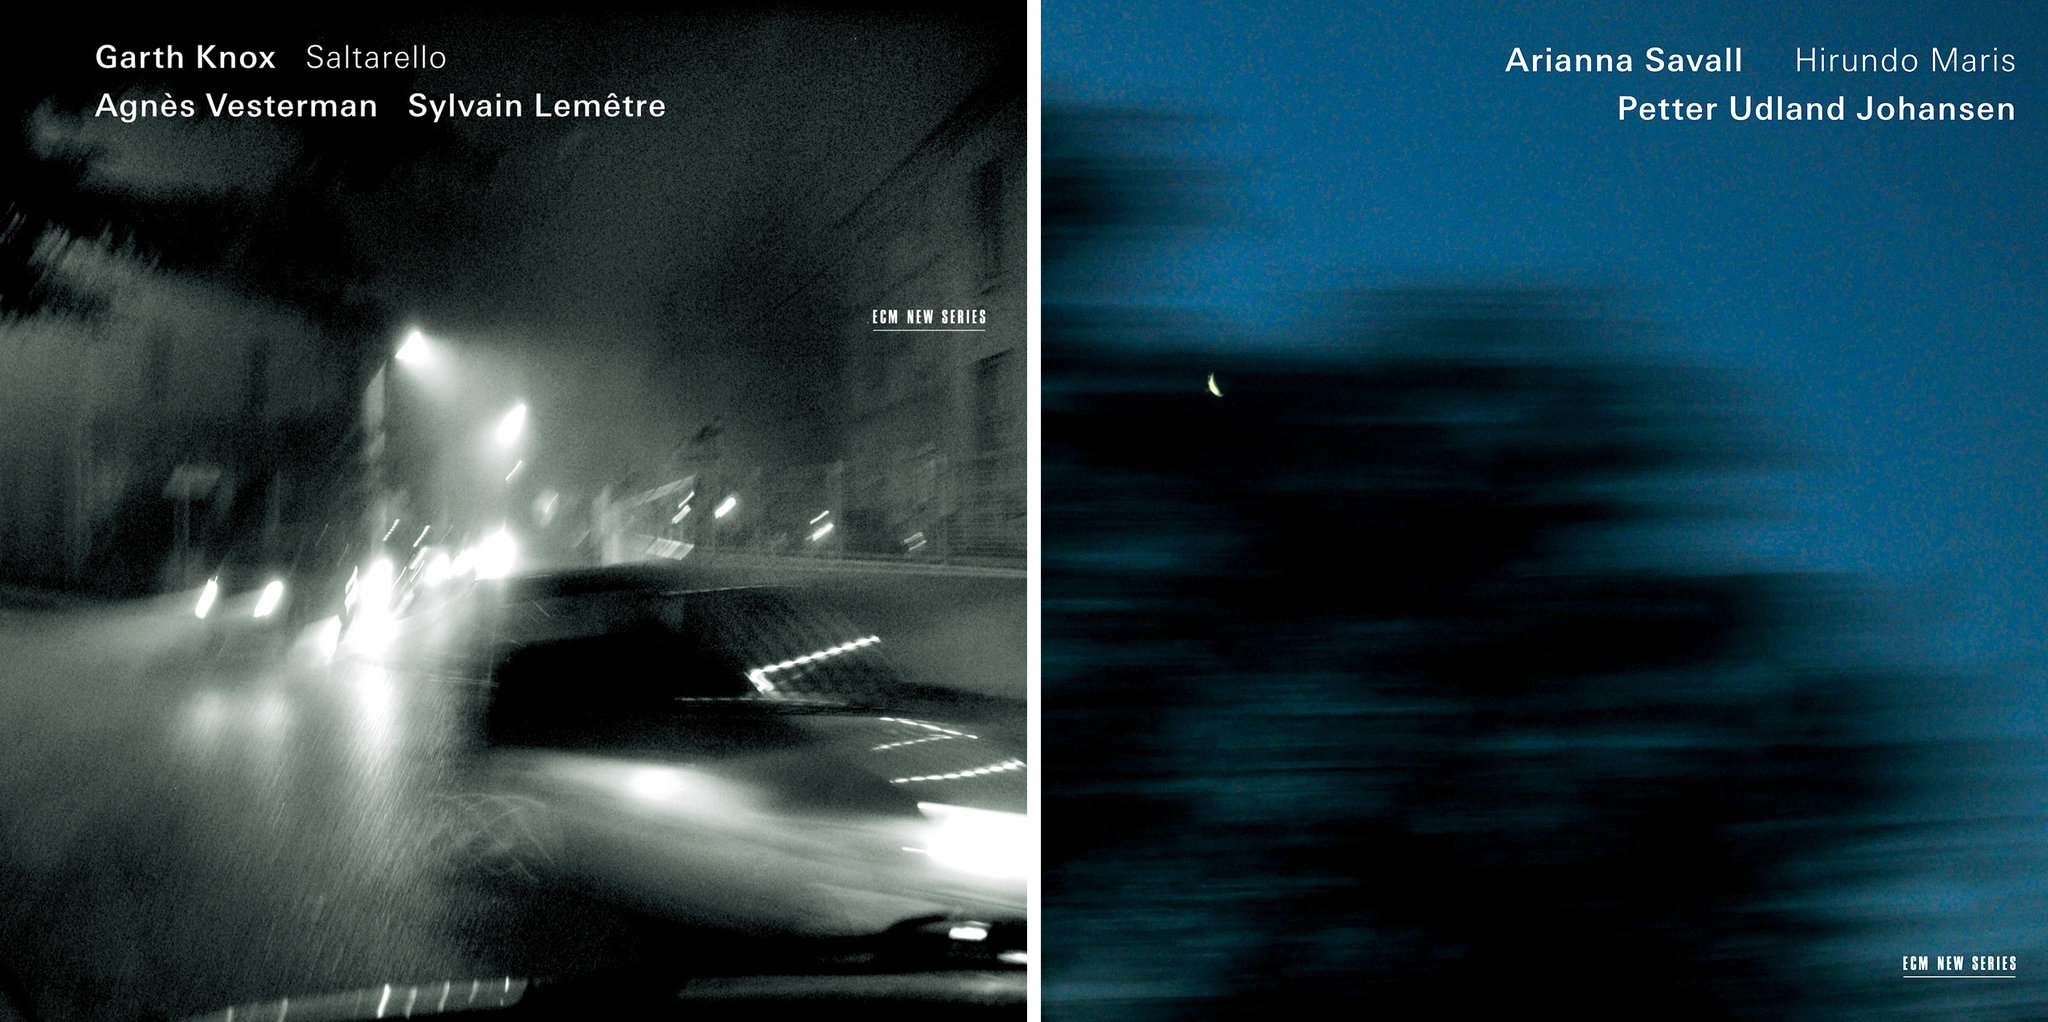 ECM Album Covers by Manfred Eicher - The New York Times